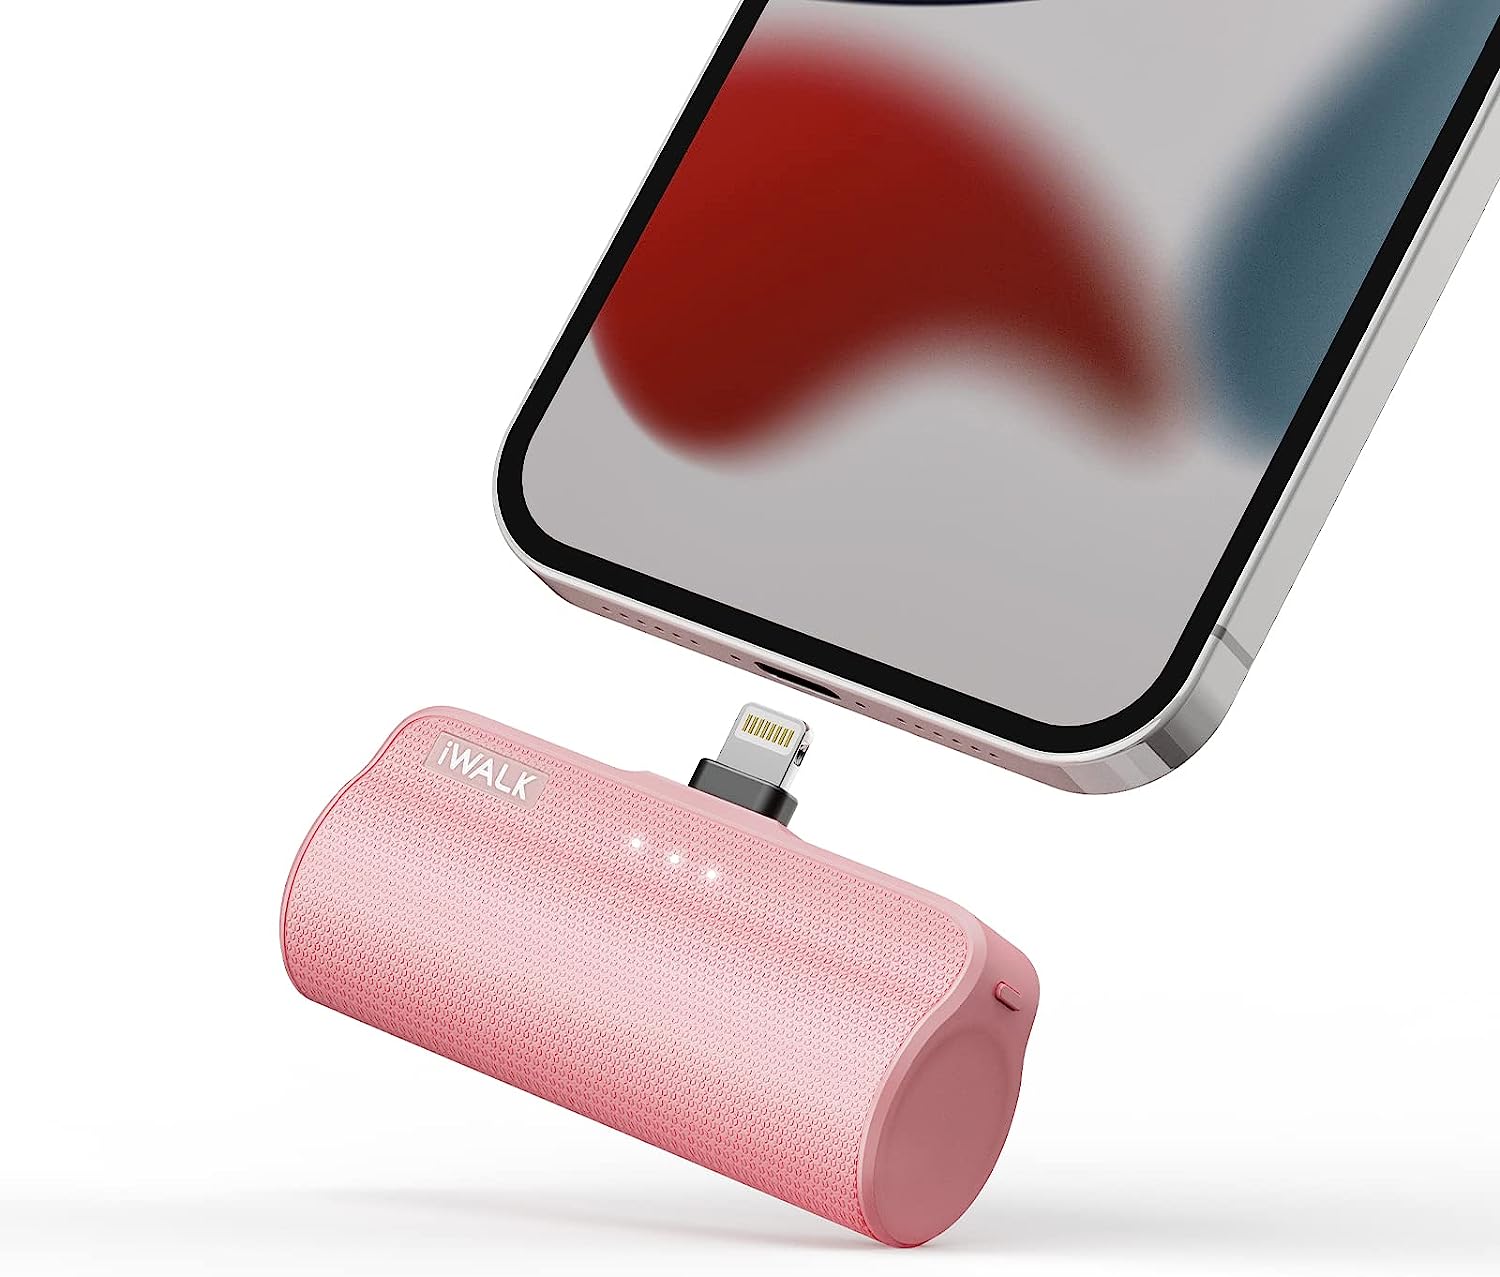 iWALK Mini Portable Charger for iPhone with Built in [...]